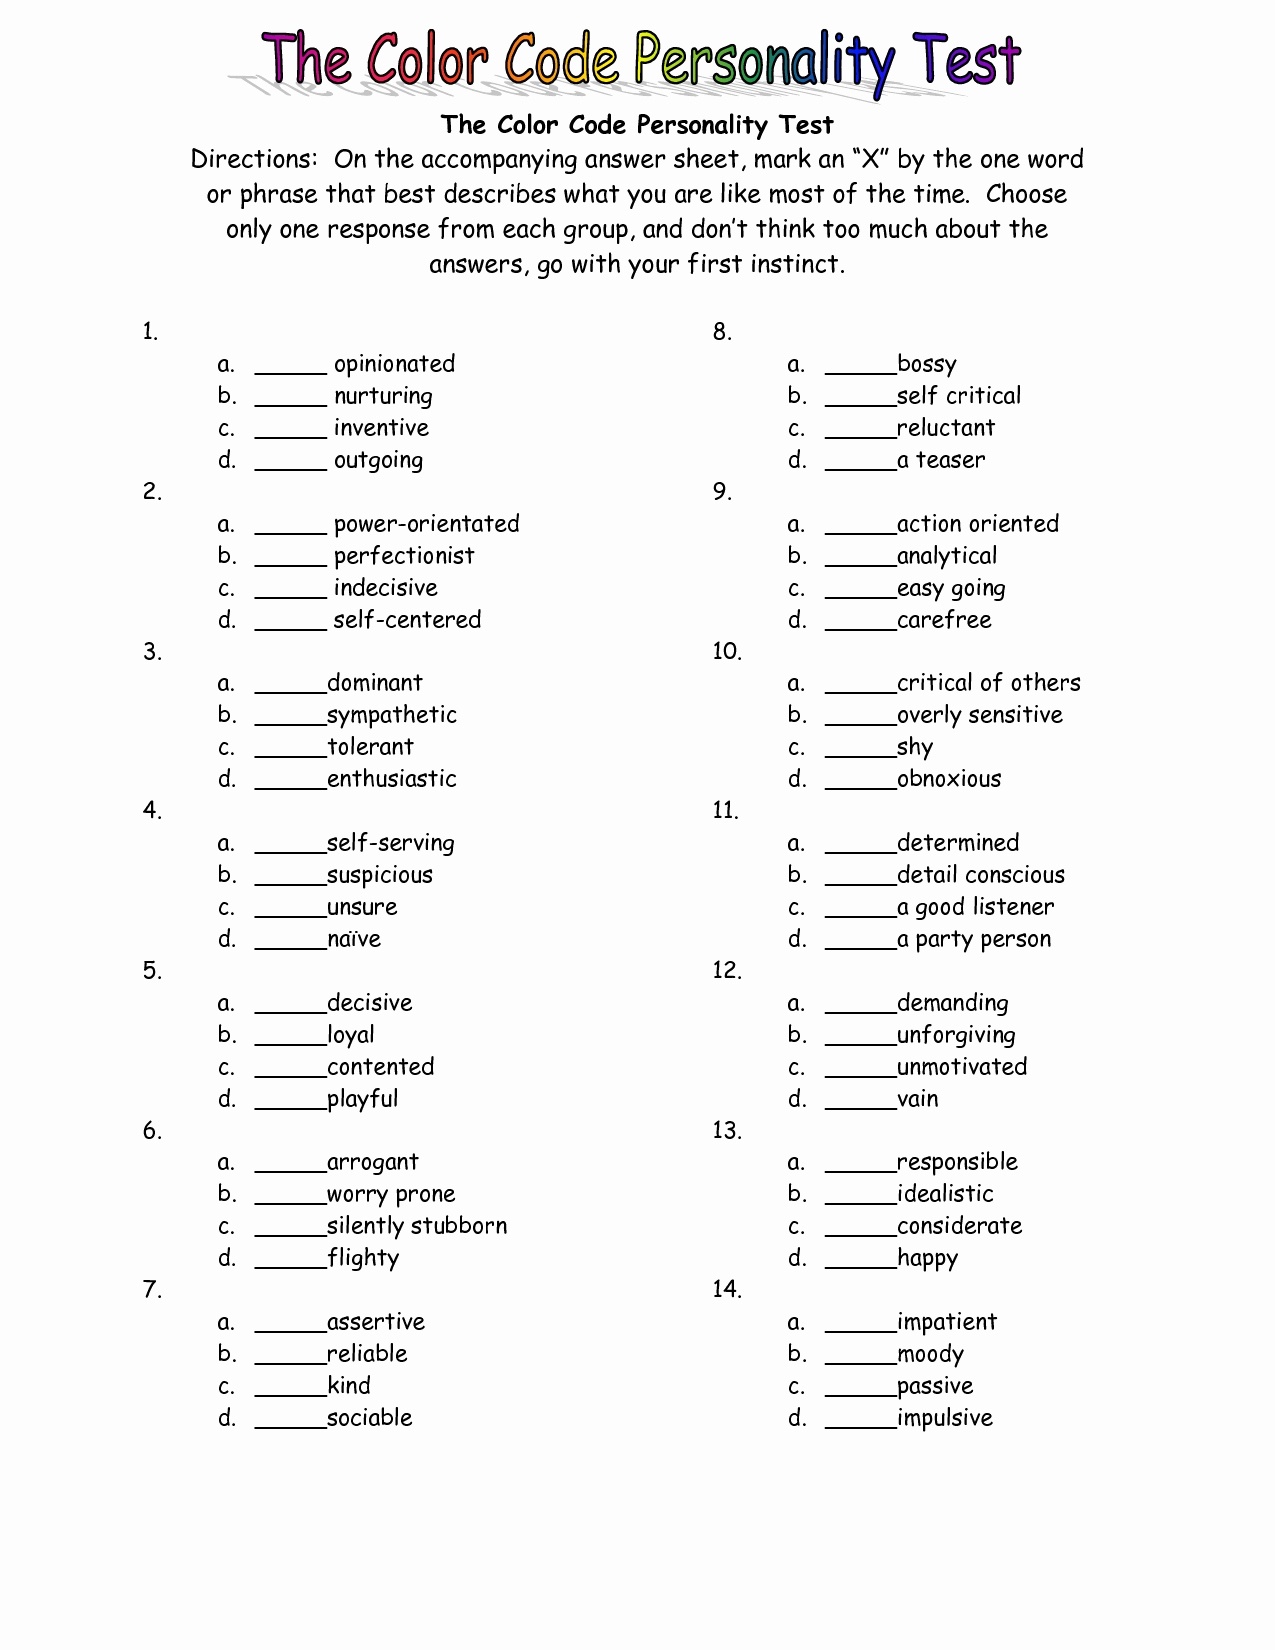 Myers-Briggs Personality Test Printable Download Example - Tduck.ca - Free Printable Personality Test